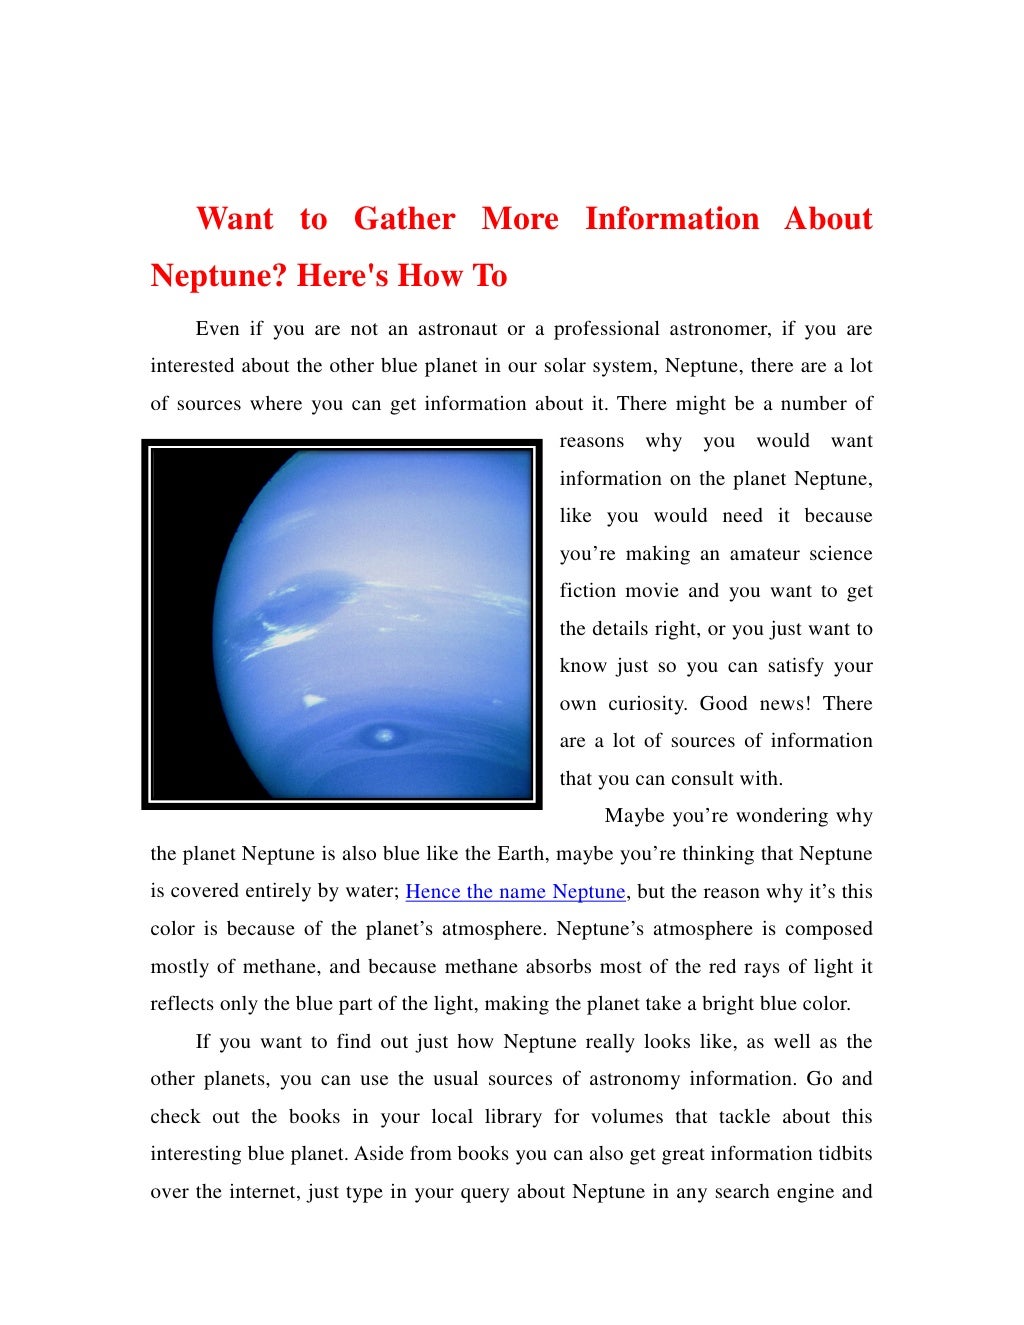 neptune planet research paper